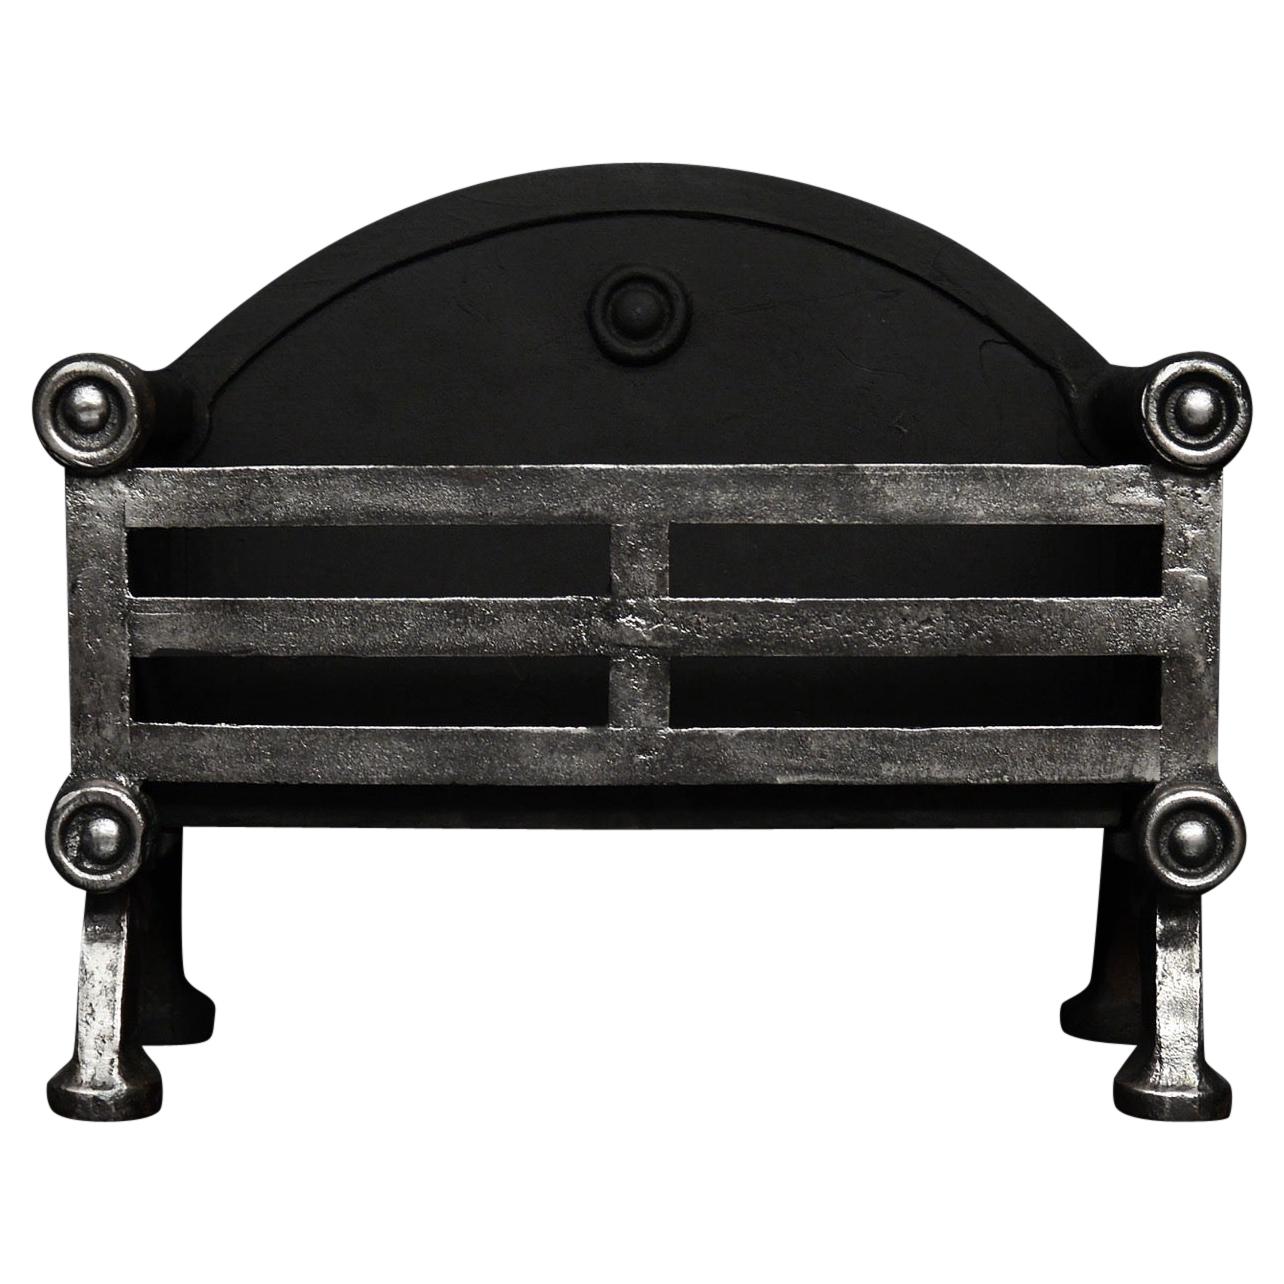 English Wrought Iron Firegrate For Sale